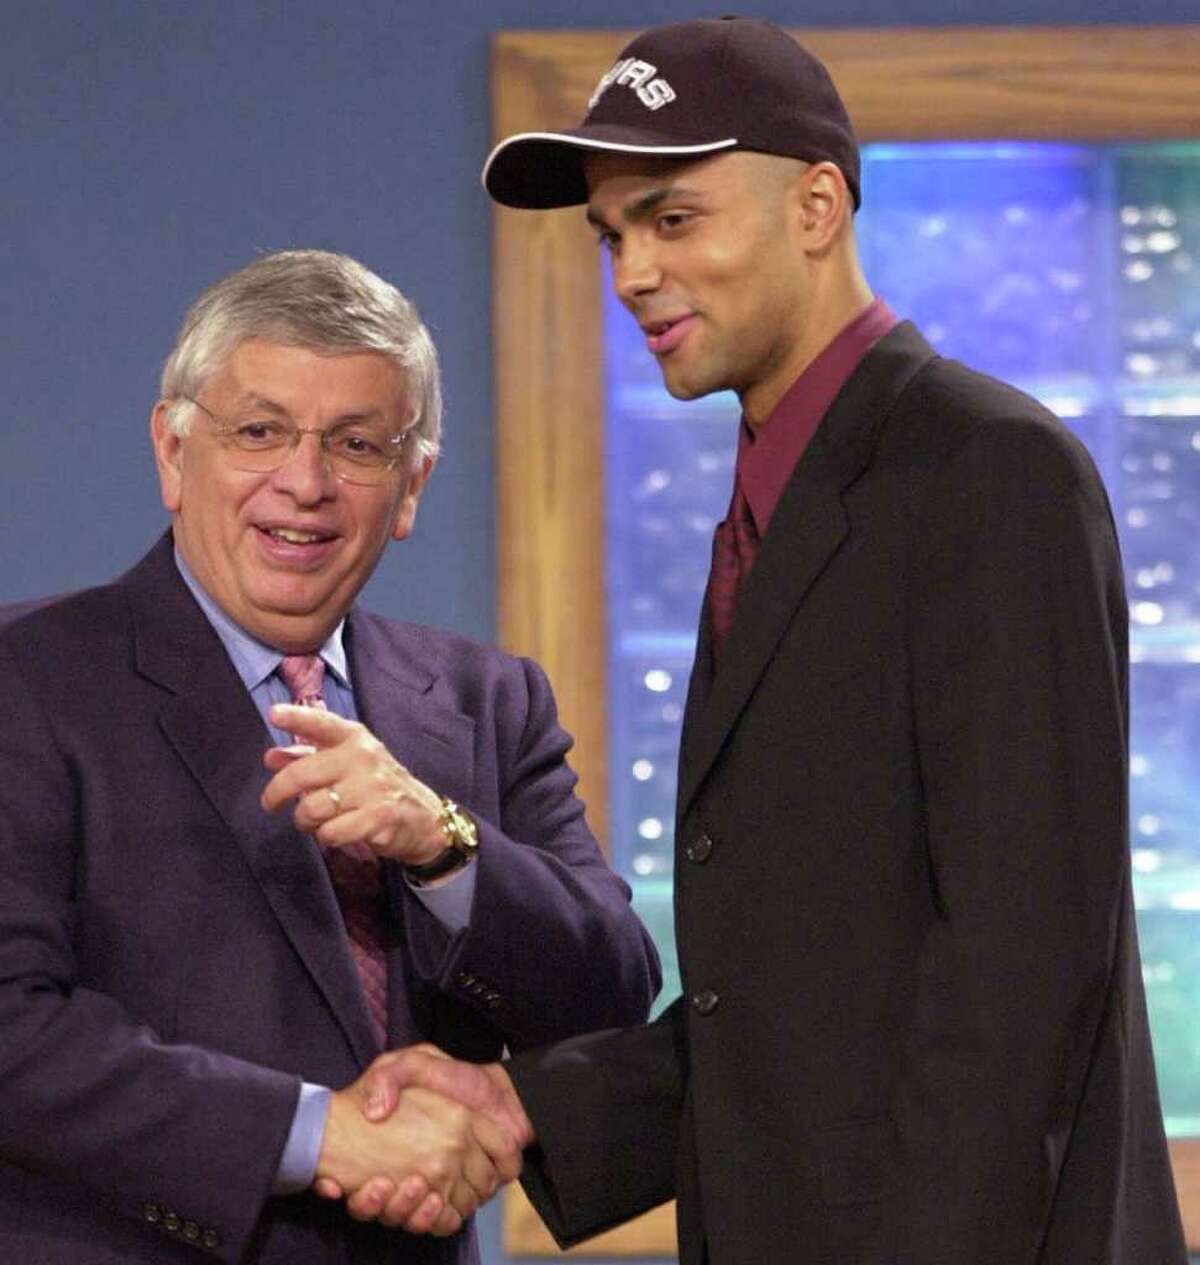 1. Tony Parker was selected by the San Antonio Spurs with the 28th overall pick in the 2001 NBA draft.